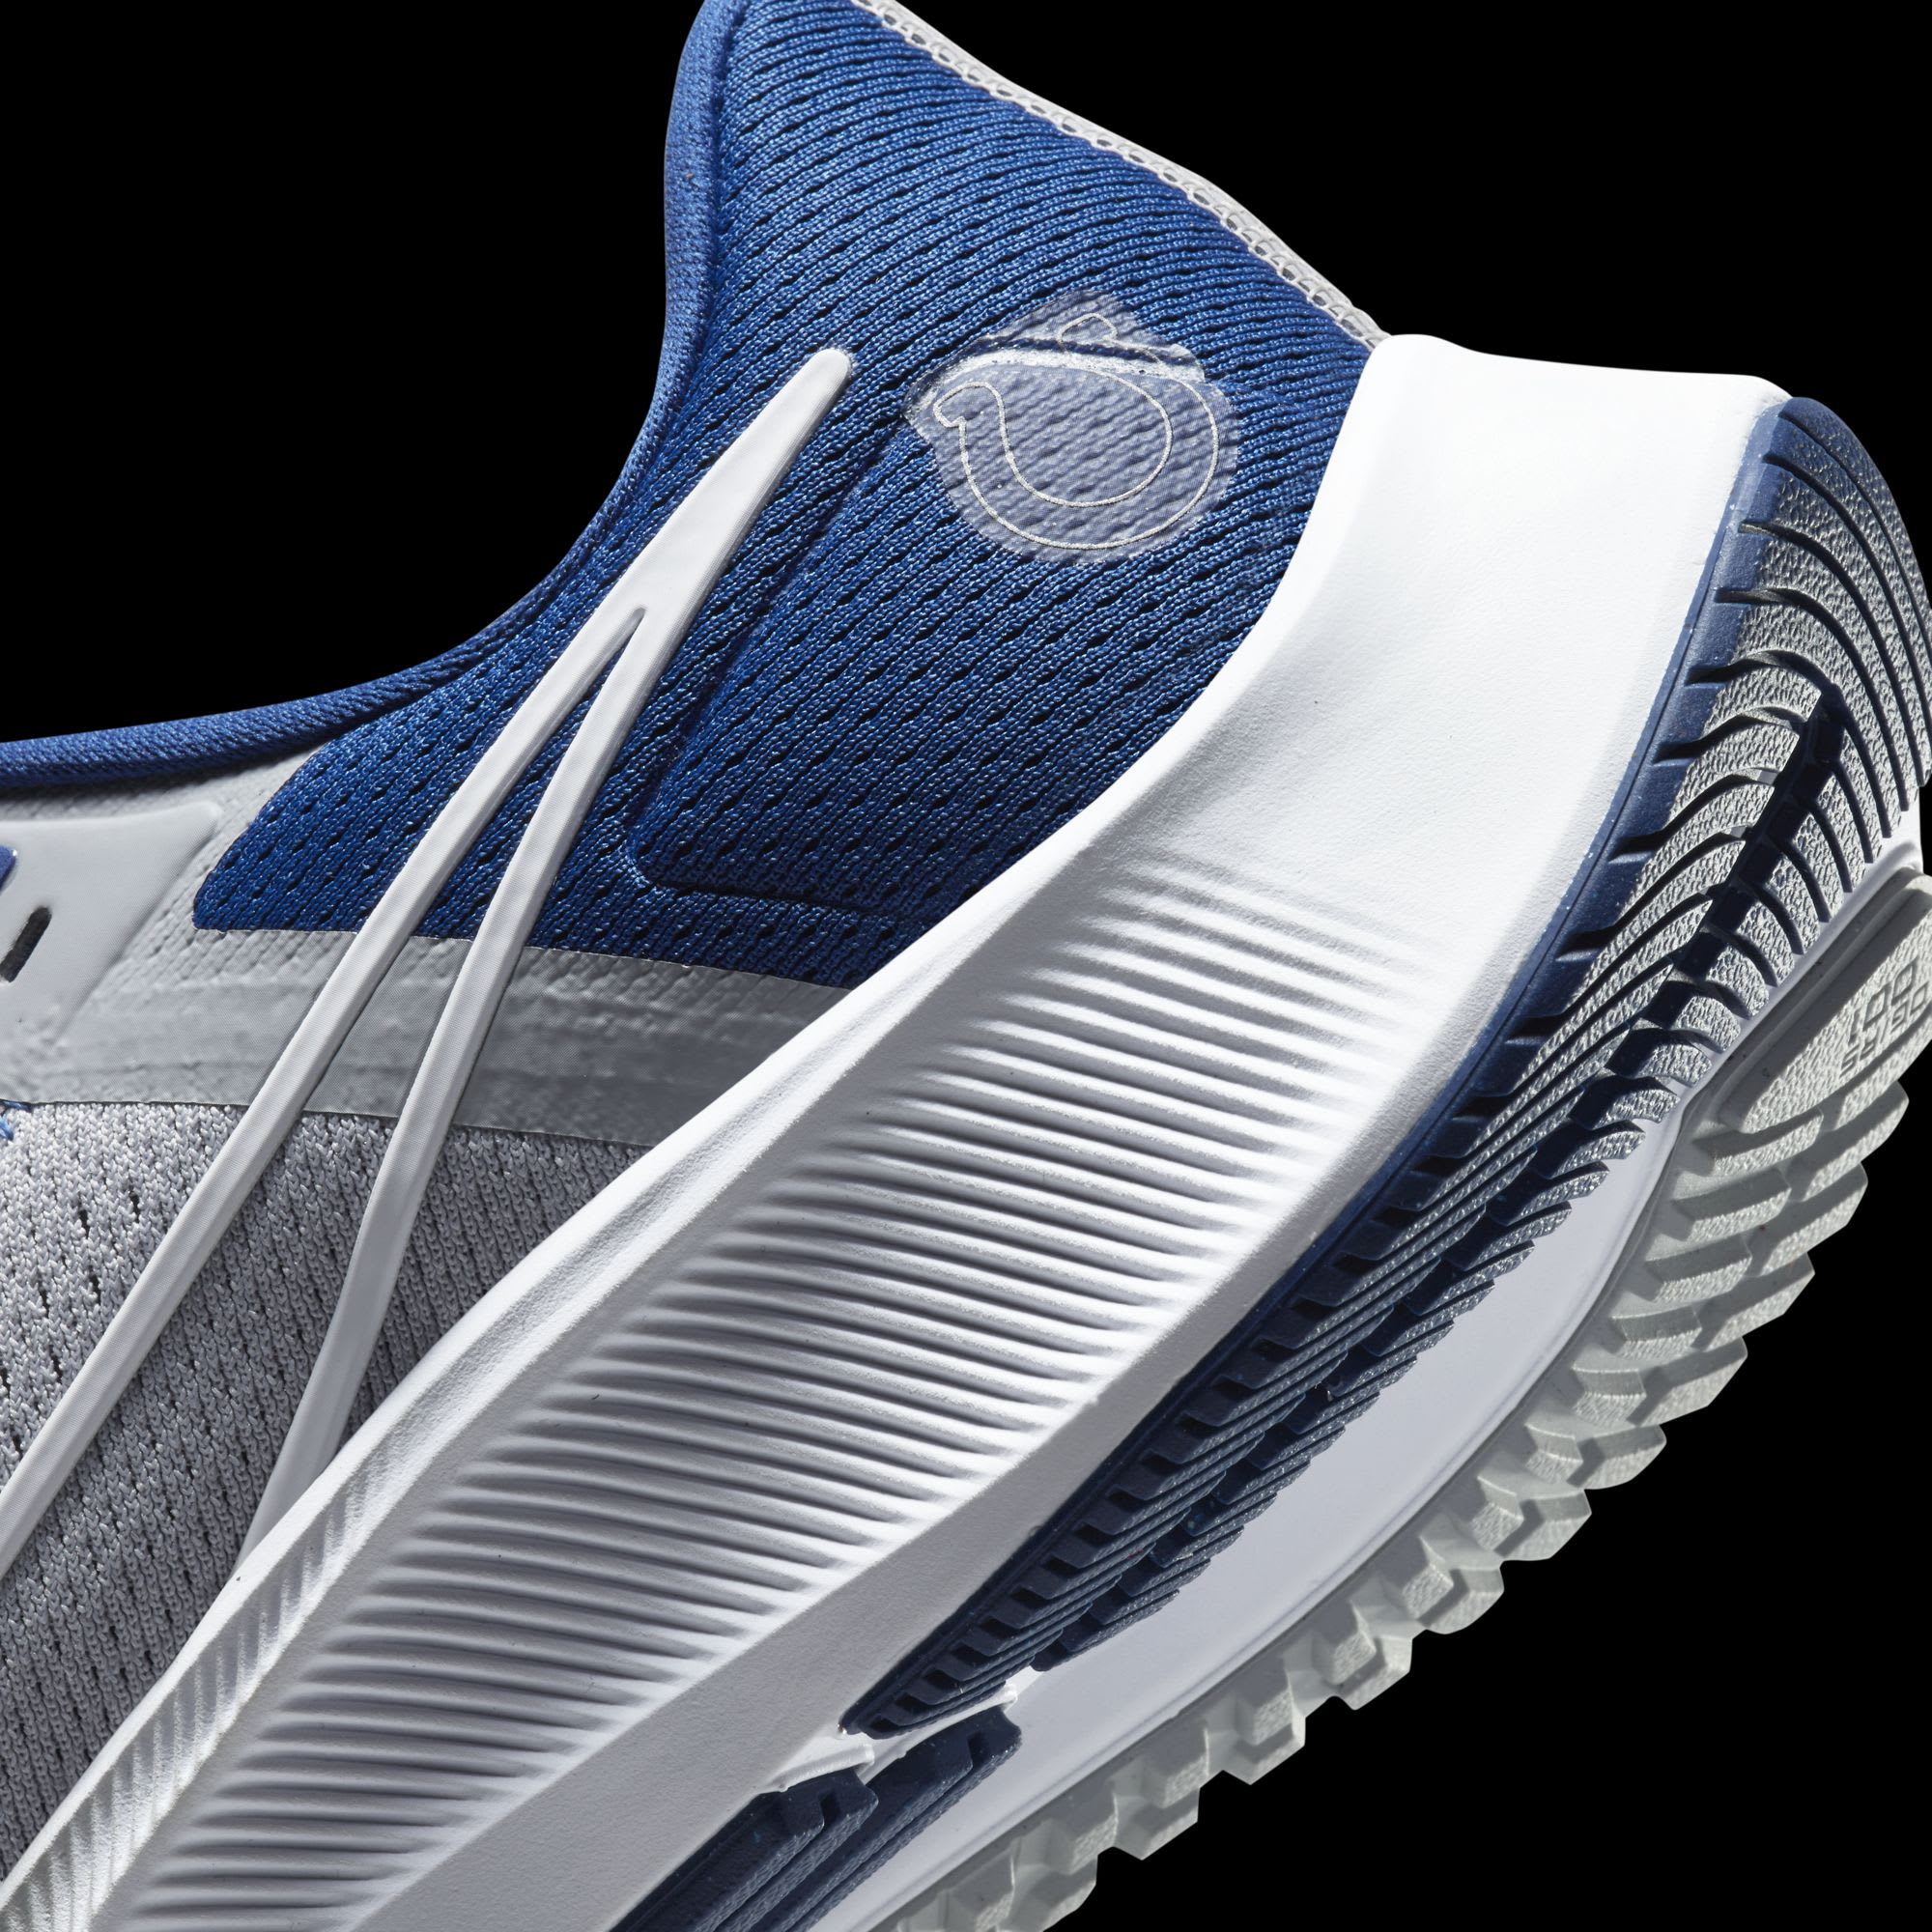 Order your Indianapolis Colts Nike Air Zoom shoes today